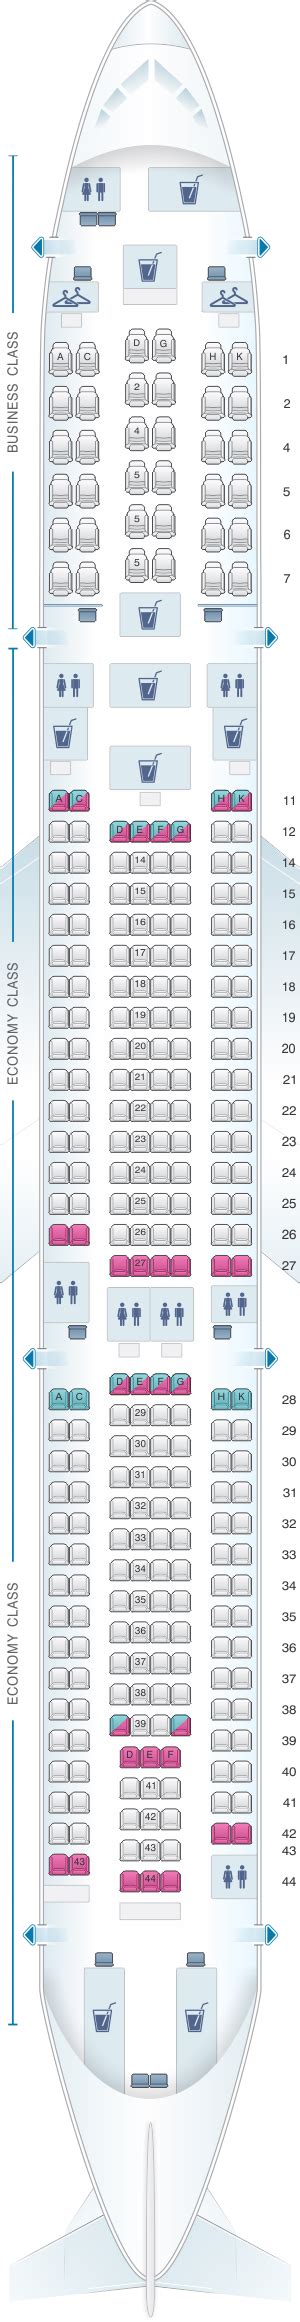 Seat Map Malaysia Airlines Airbus A330 300 Seatmaestro